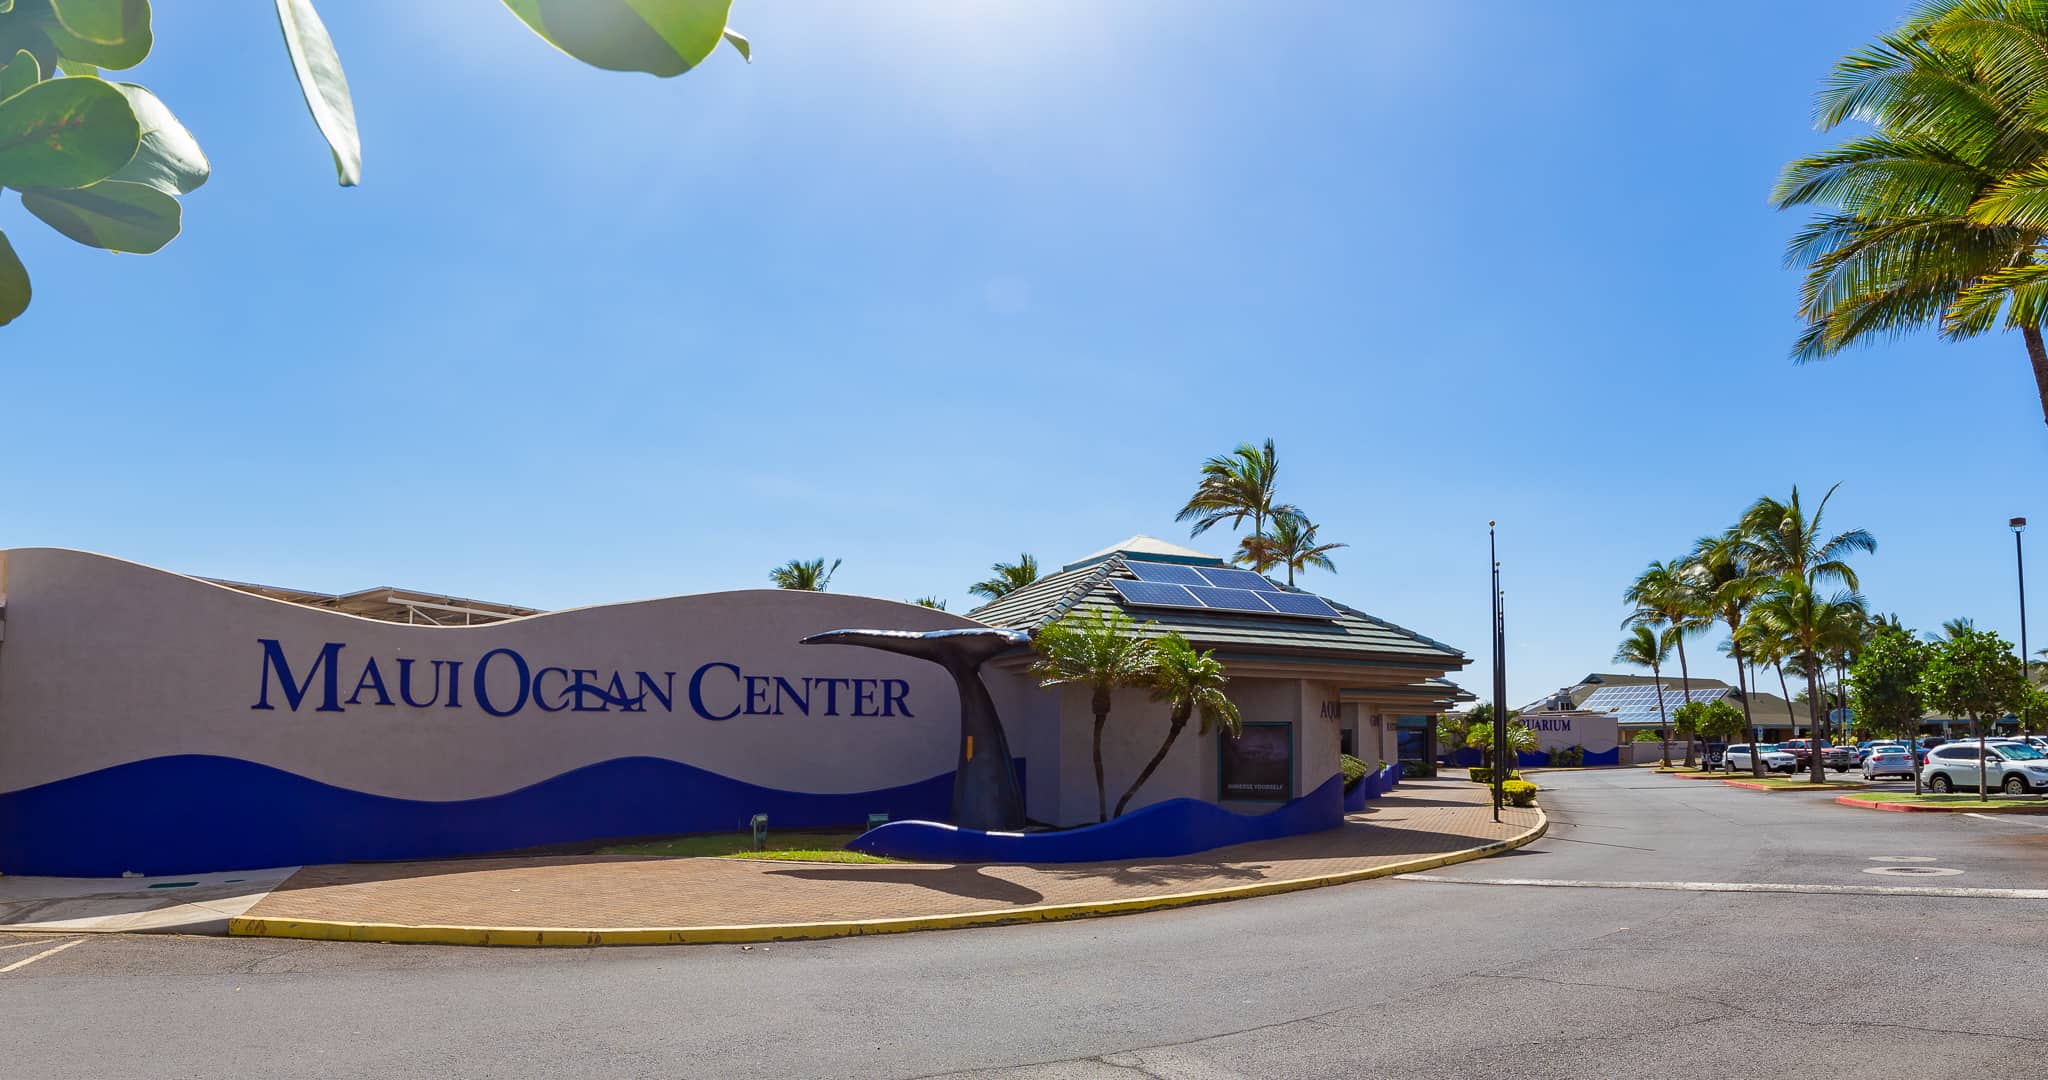 Maui Ocean Center Reopens With Health and WellBeing in